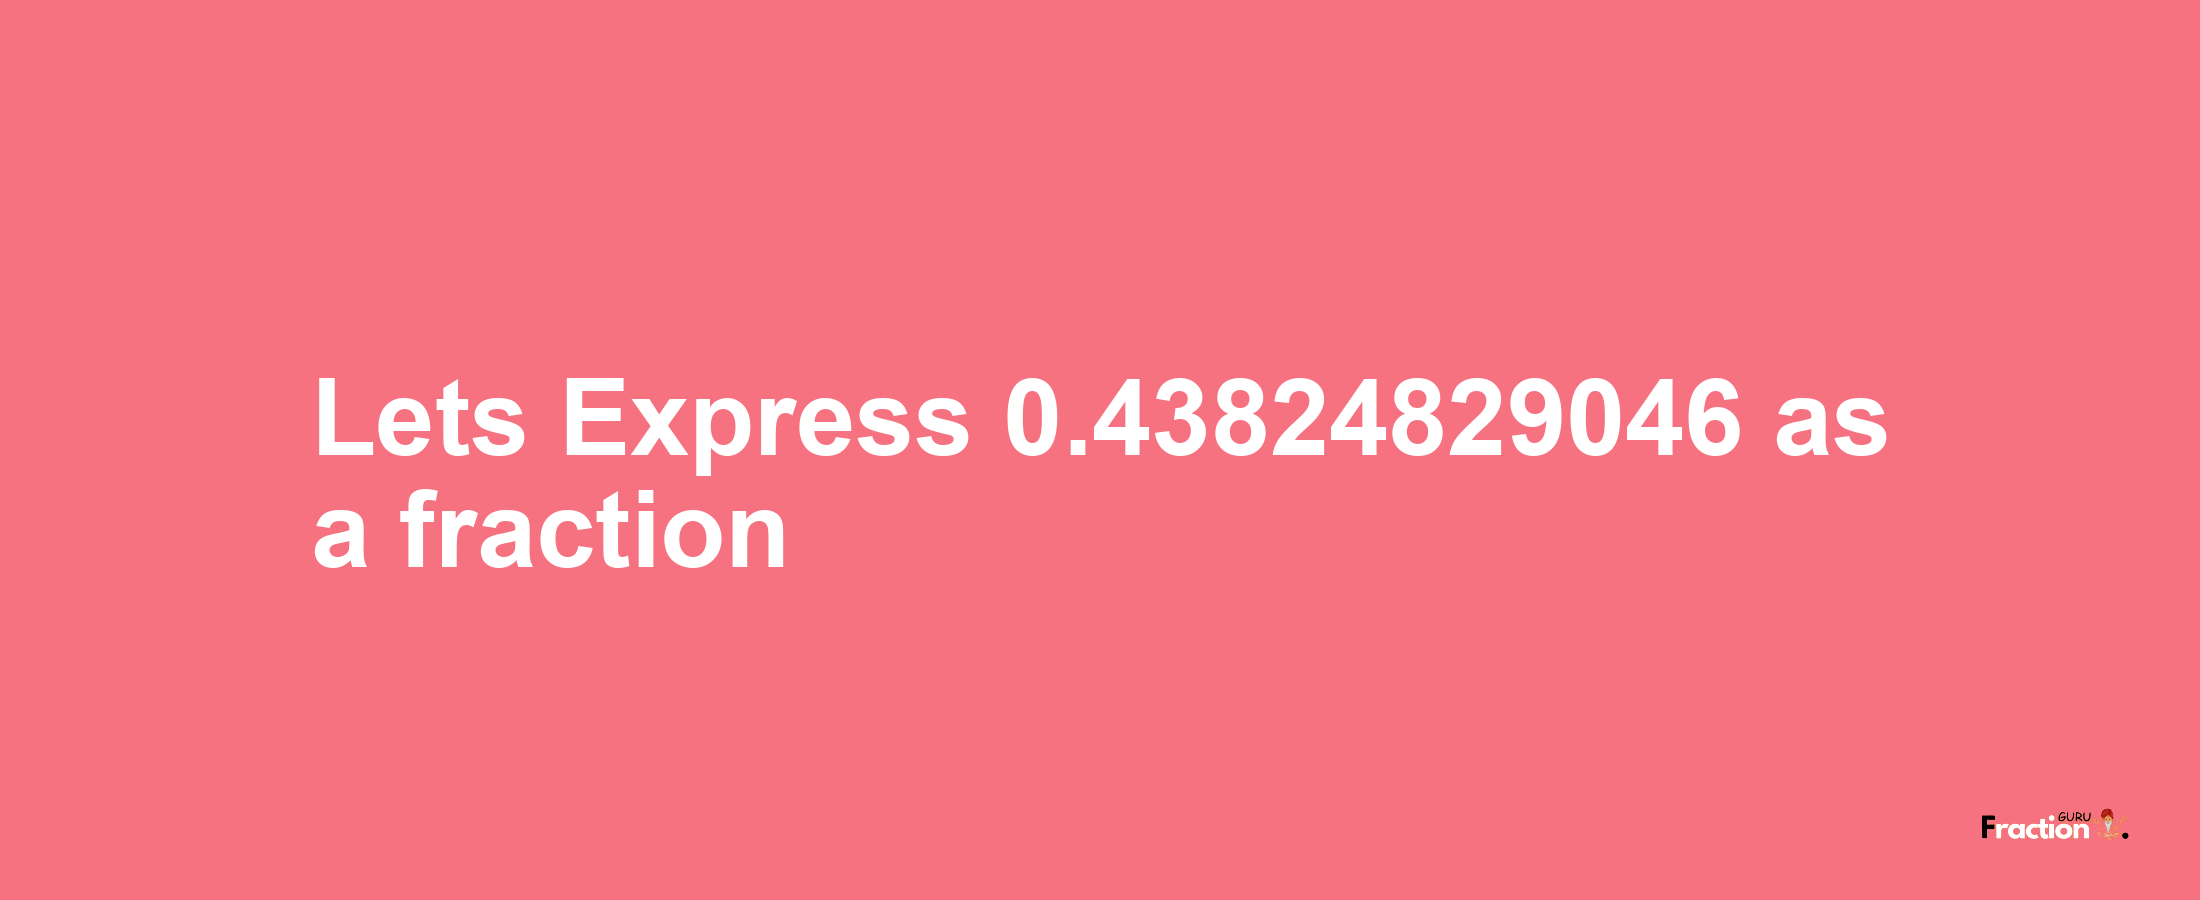 Lets Express 0.43824829046 as afraction